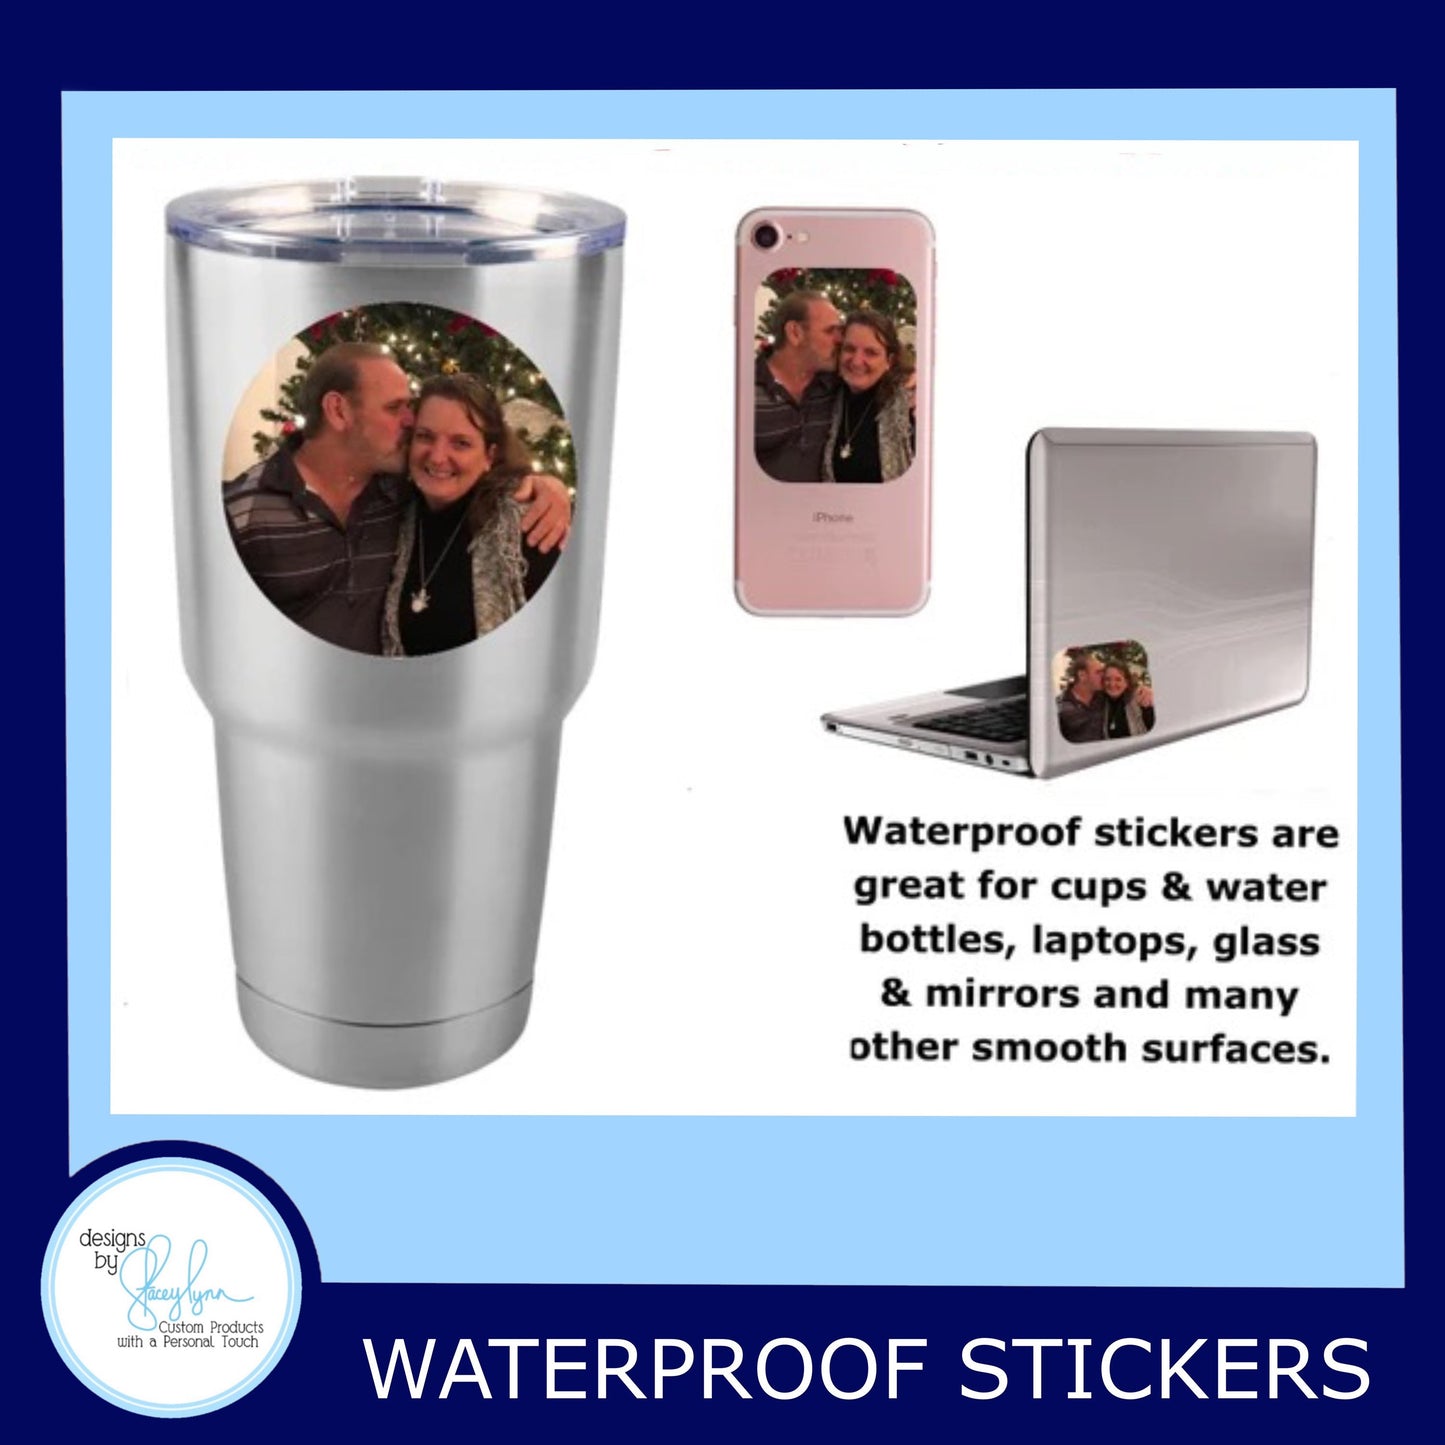 Let your light shine - UV/ Waterproof Vinyl Sticker/ Decal- Choice of Size, Single or Bulk quantities